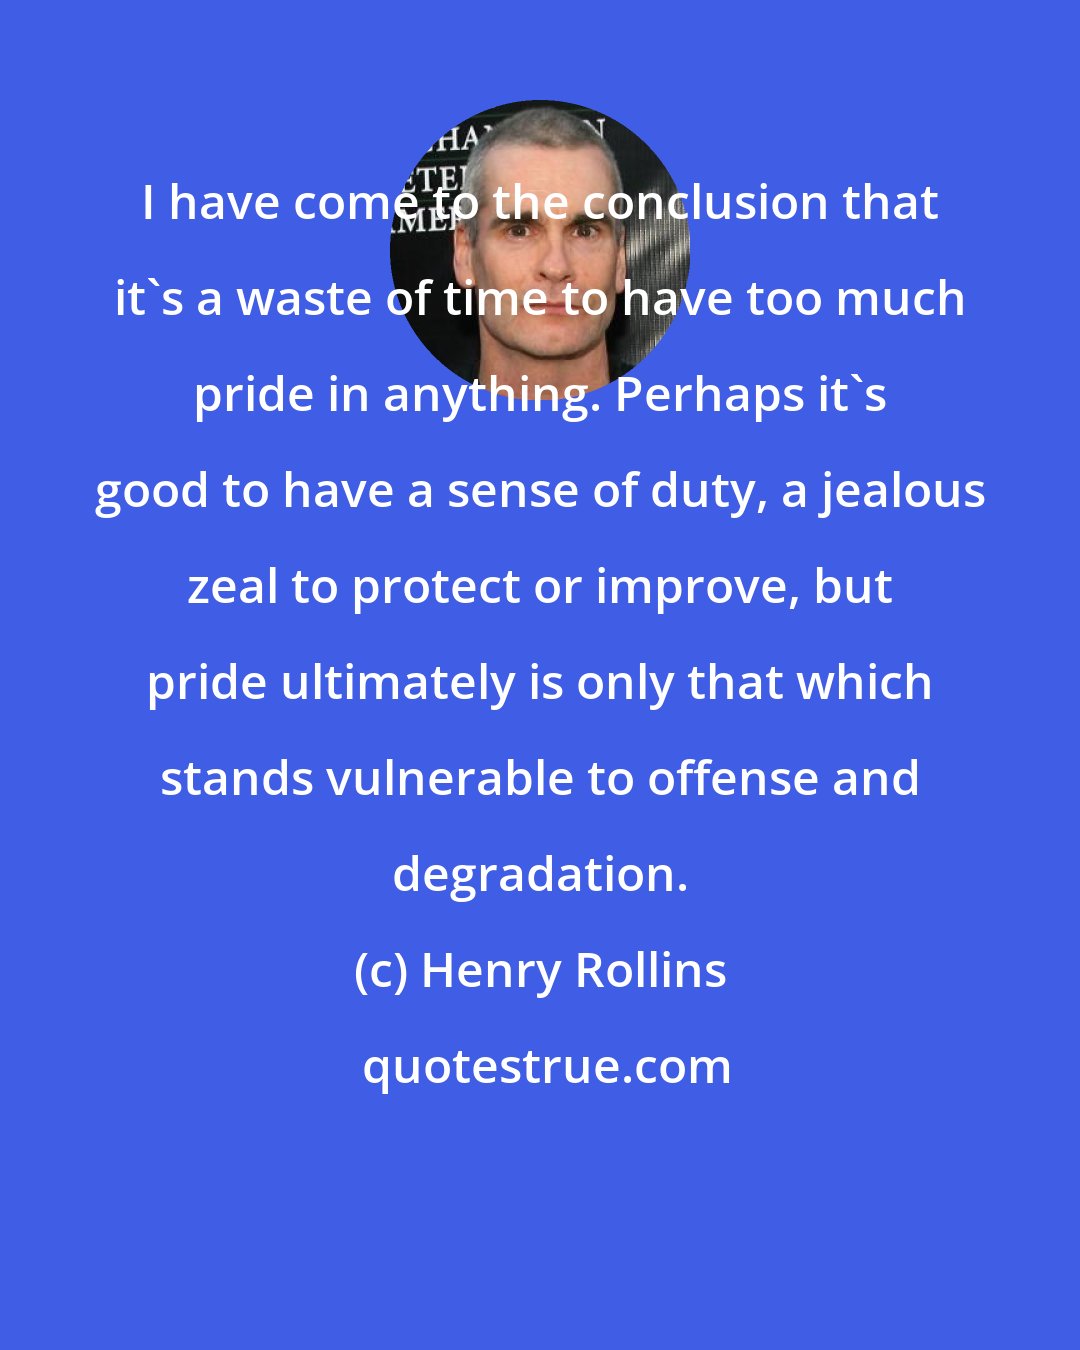 Henry Rollins: I have come to the conclusion that it's a waste of time to have too much pride in anything. Perhaps it's good to have a sense of duty, a jealous zeal to protect or improve, but pride ultimately is only that which stands vulnerable to offense and degradation.